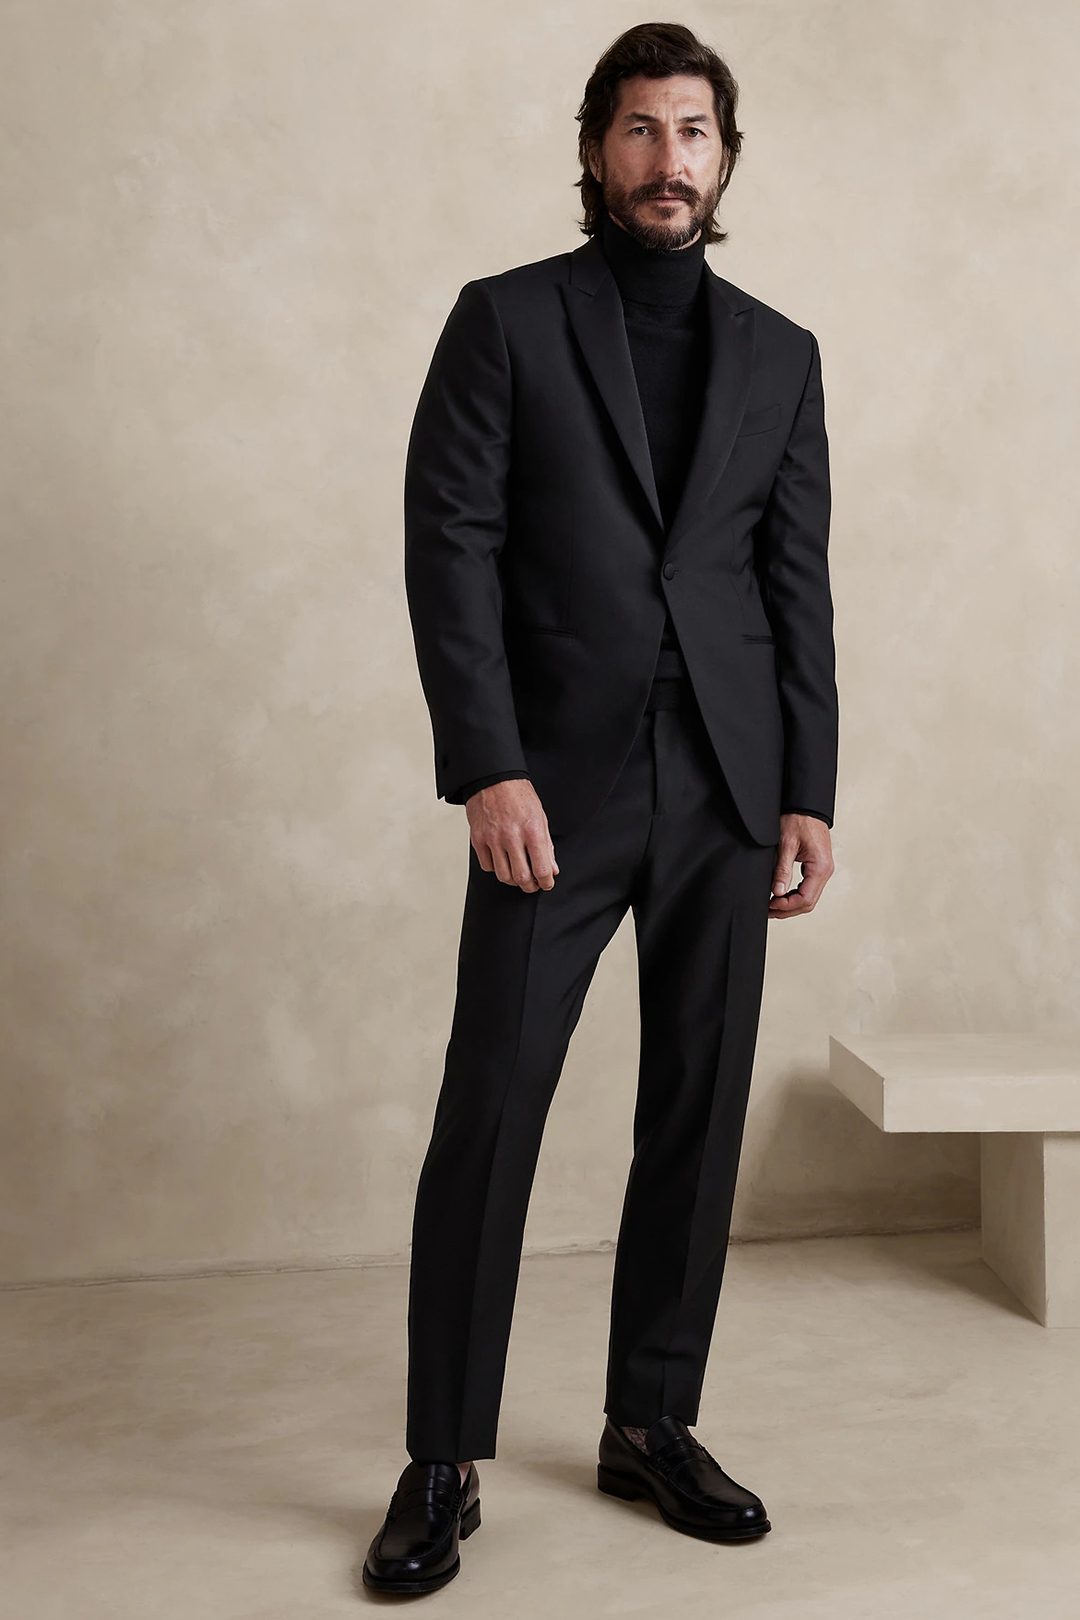 All black outfit with a suit, turtleneck, and penny loafers